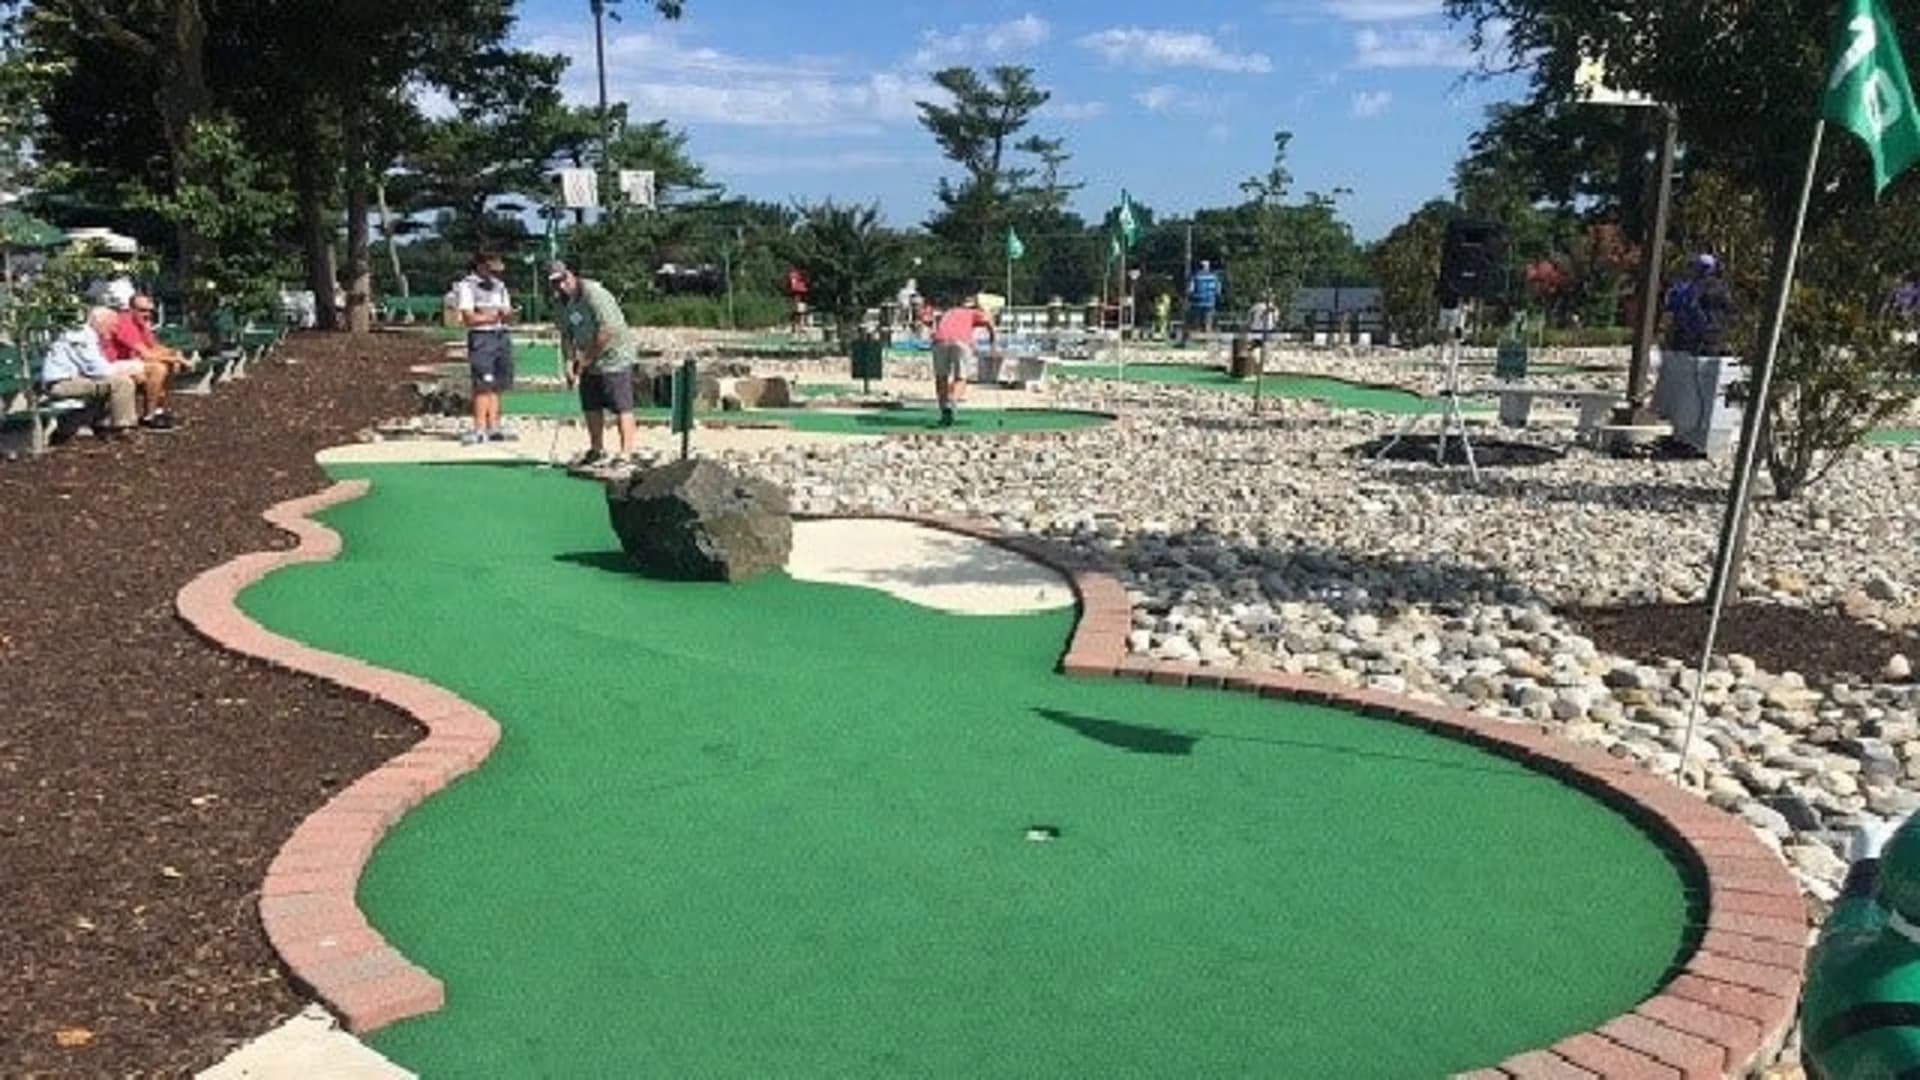 Guide: Mini-golf courses around New Jersey